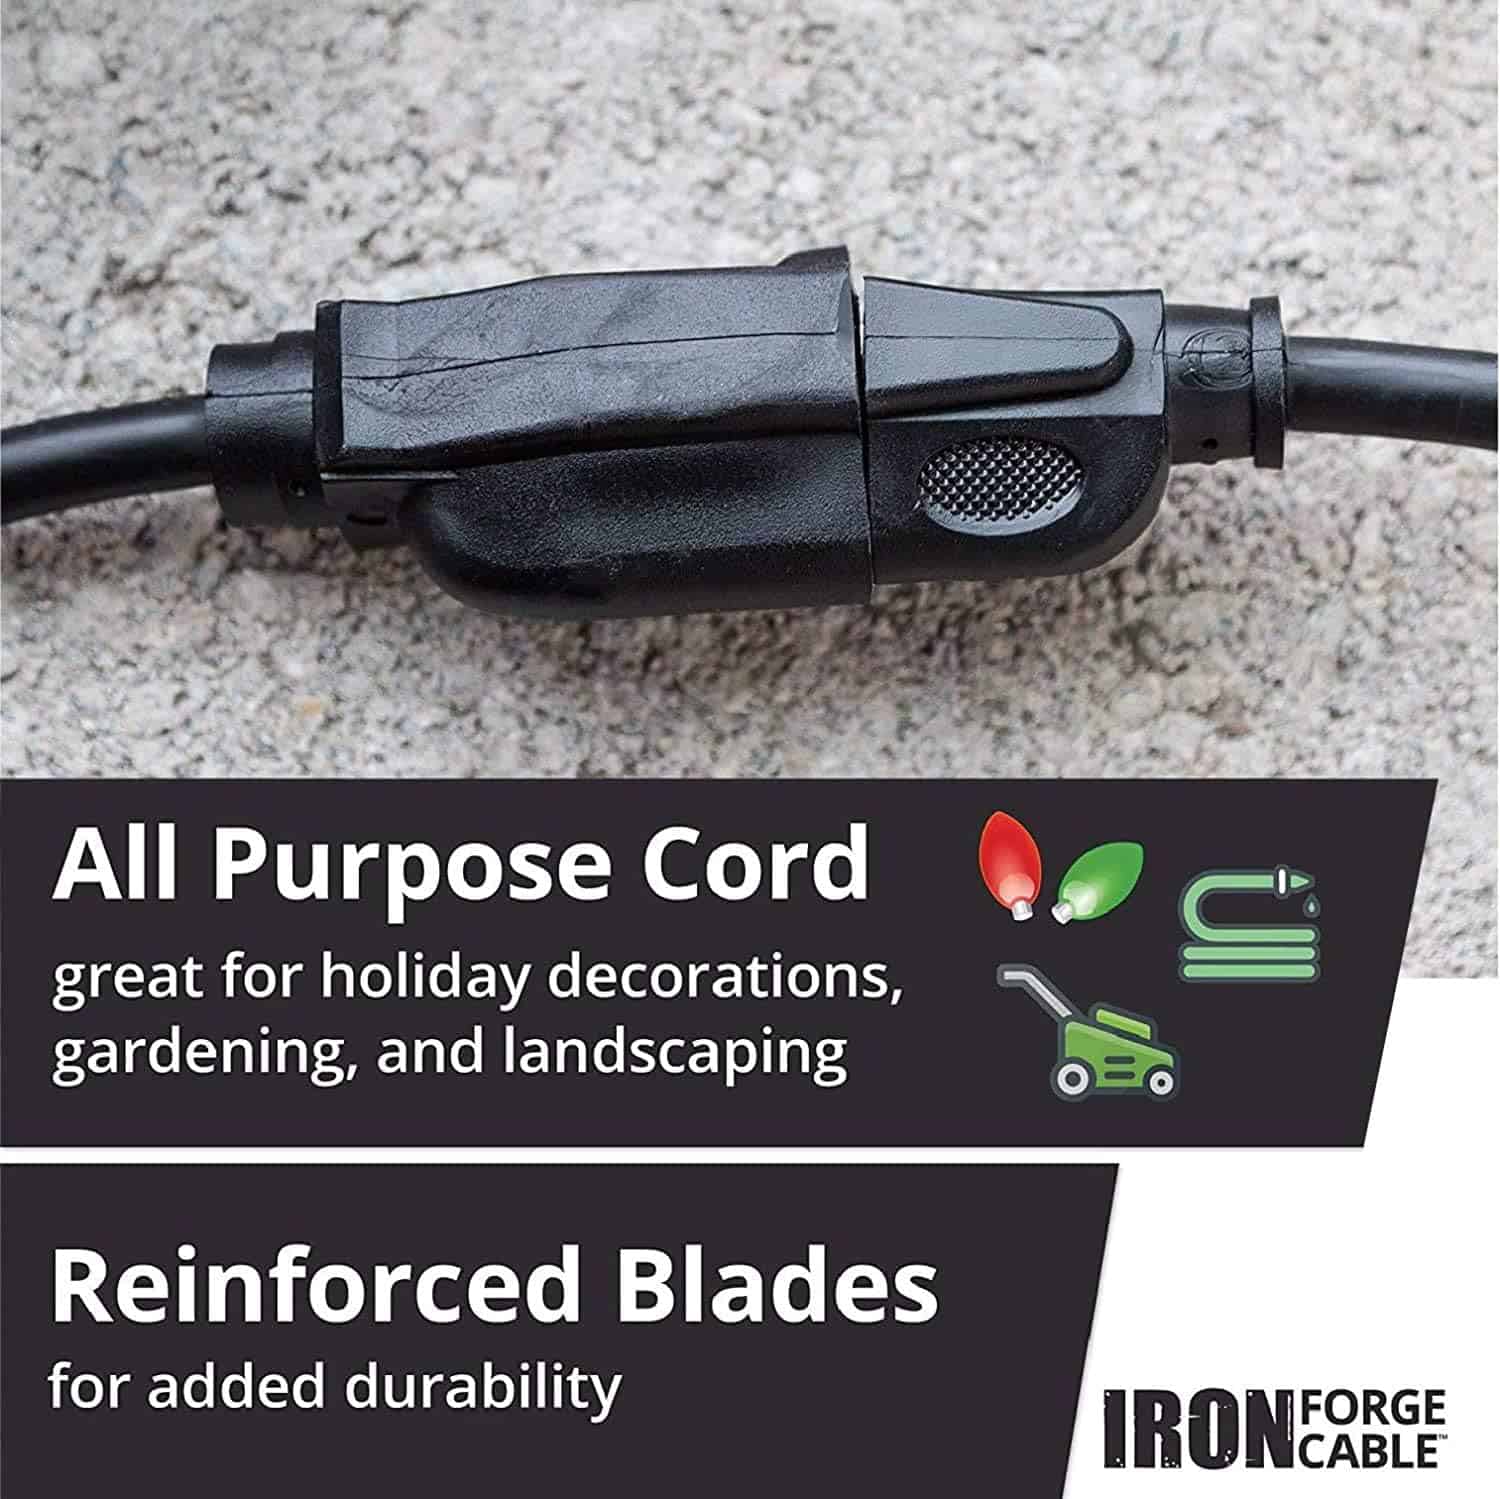 IRON FORGE CABLE 2 Pack of 10 Ft Heavy Duty Extension Cord Outdoor, 12 Gauge Extension Cord 10 ft 3 Prong, 12 3 Black Extension Cable for Major Appliances, US Veteran Owned 3